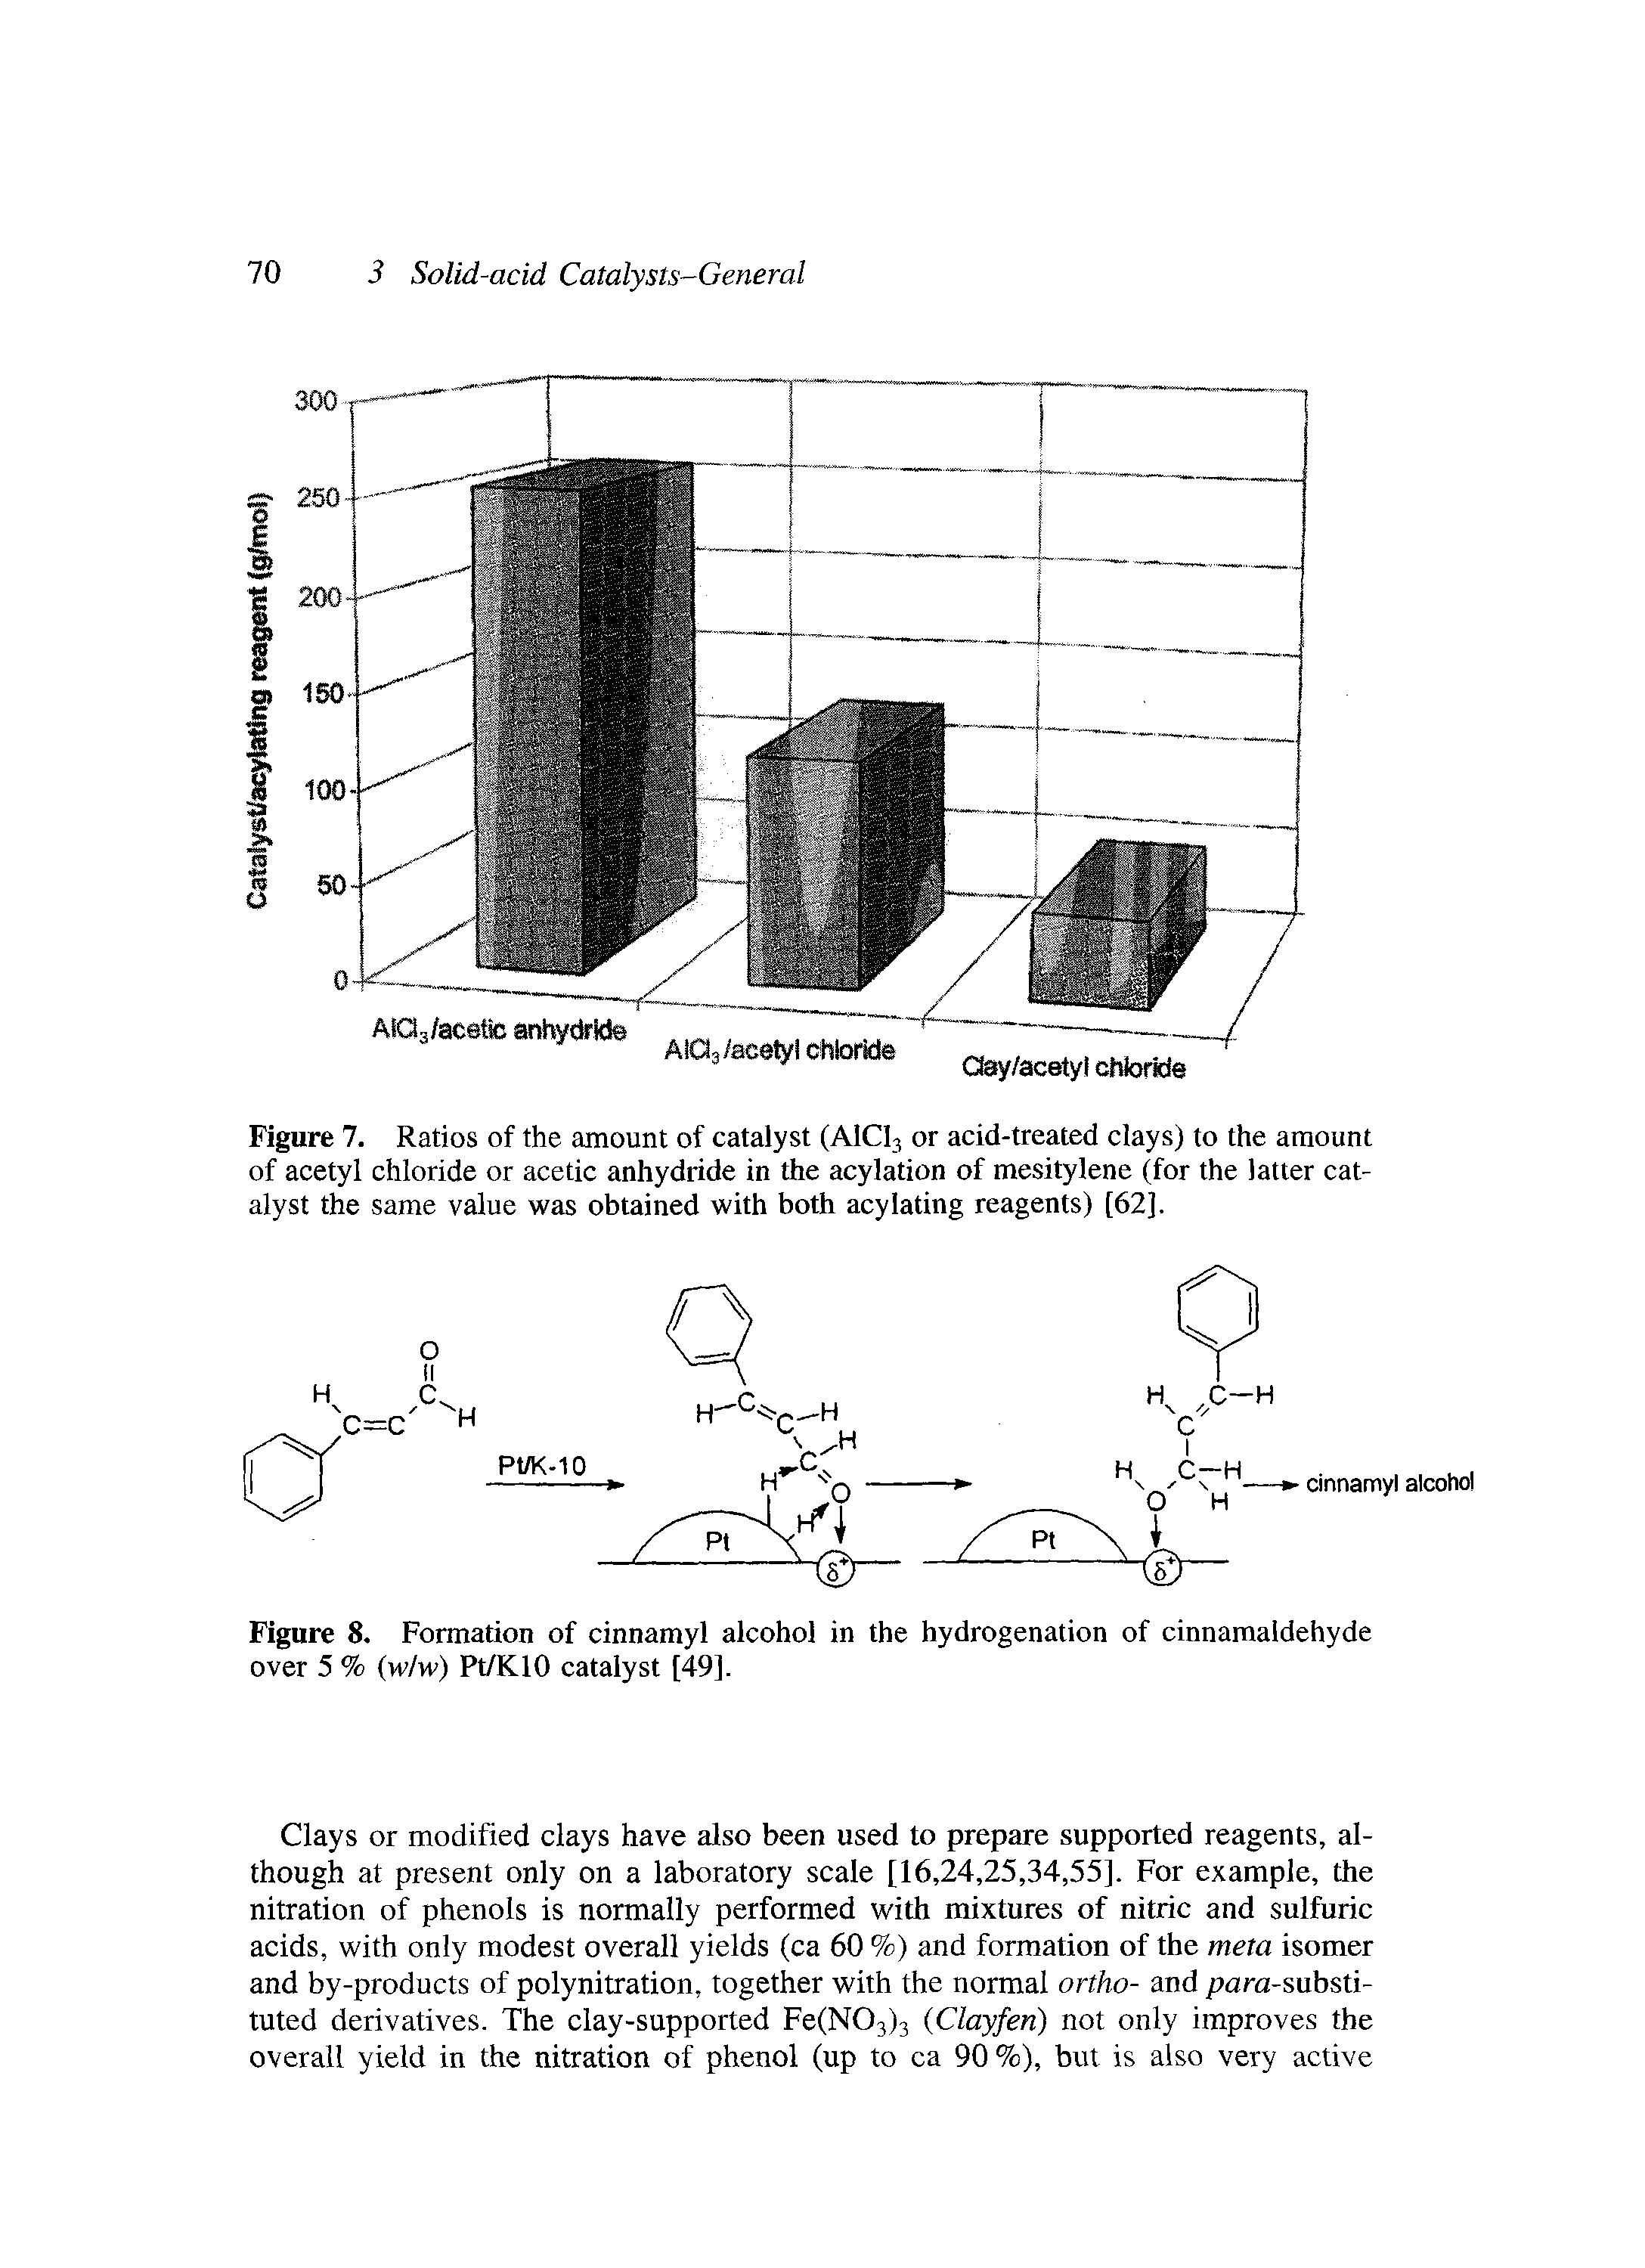 Figure 7. Ratios of the amount of catalyst (AICI3 or acid-treated clays) to the amount of acetyl chloride or acetic anhydride in the acylation of mesitylene (for the latter catalyst the same value was obtained with both acylating reagents) [62].